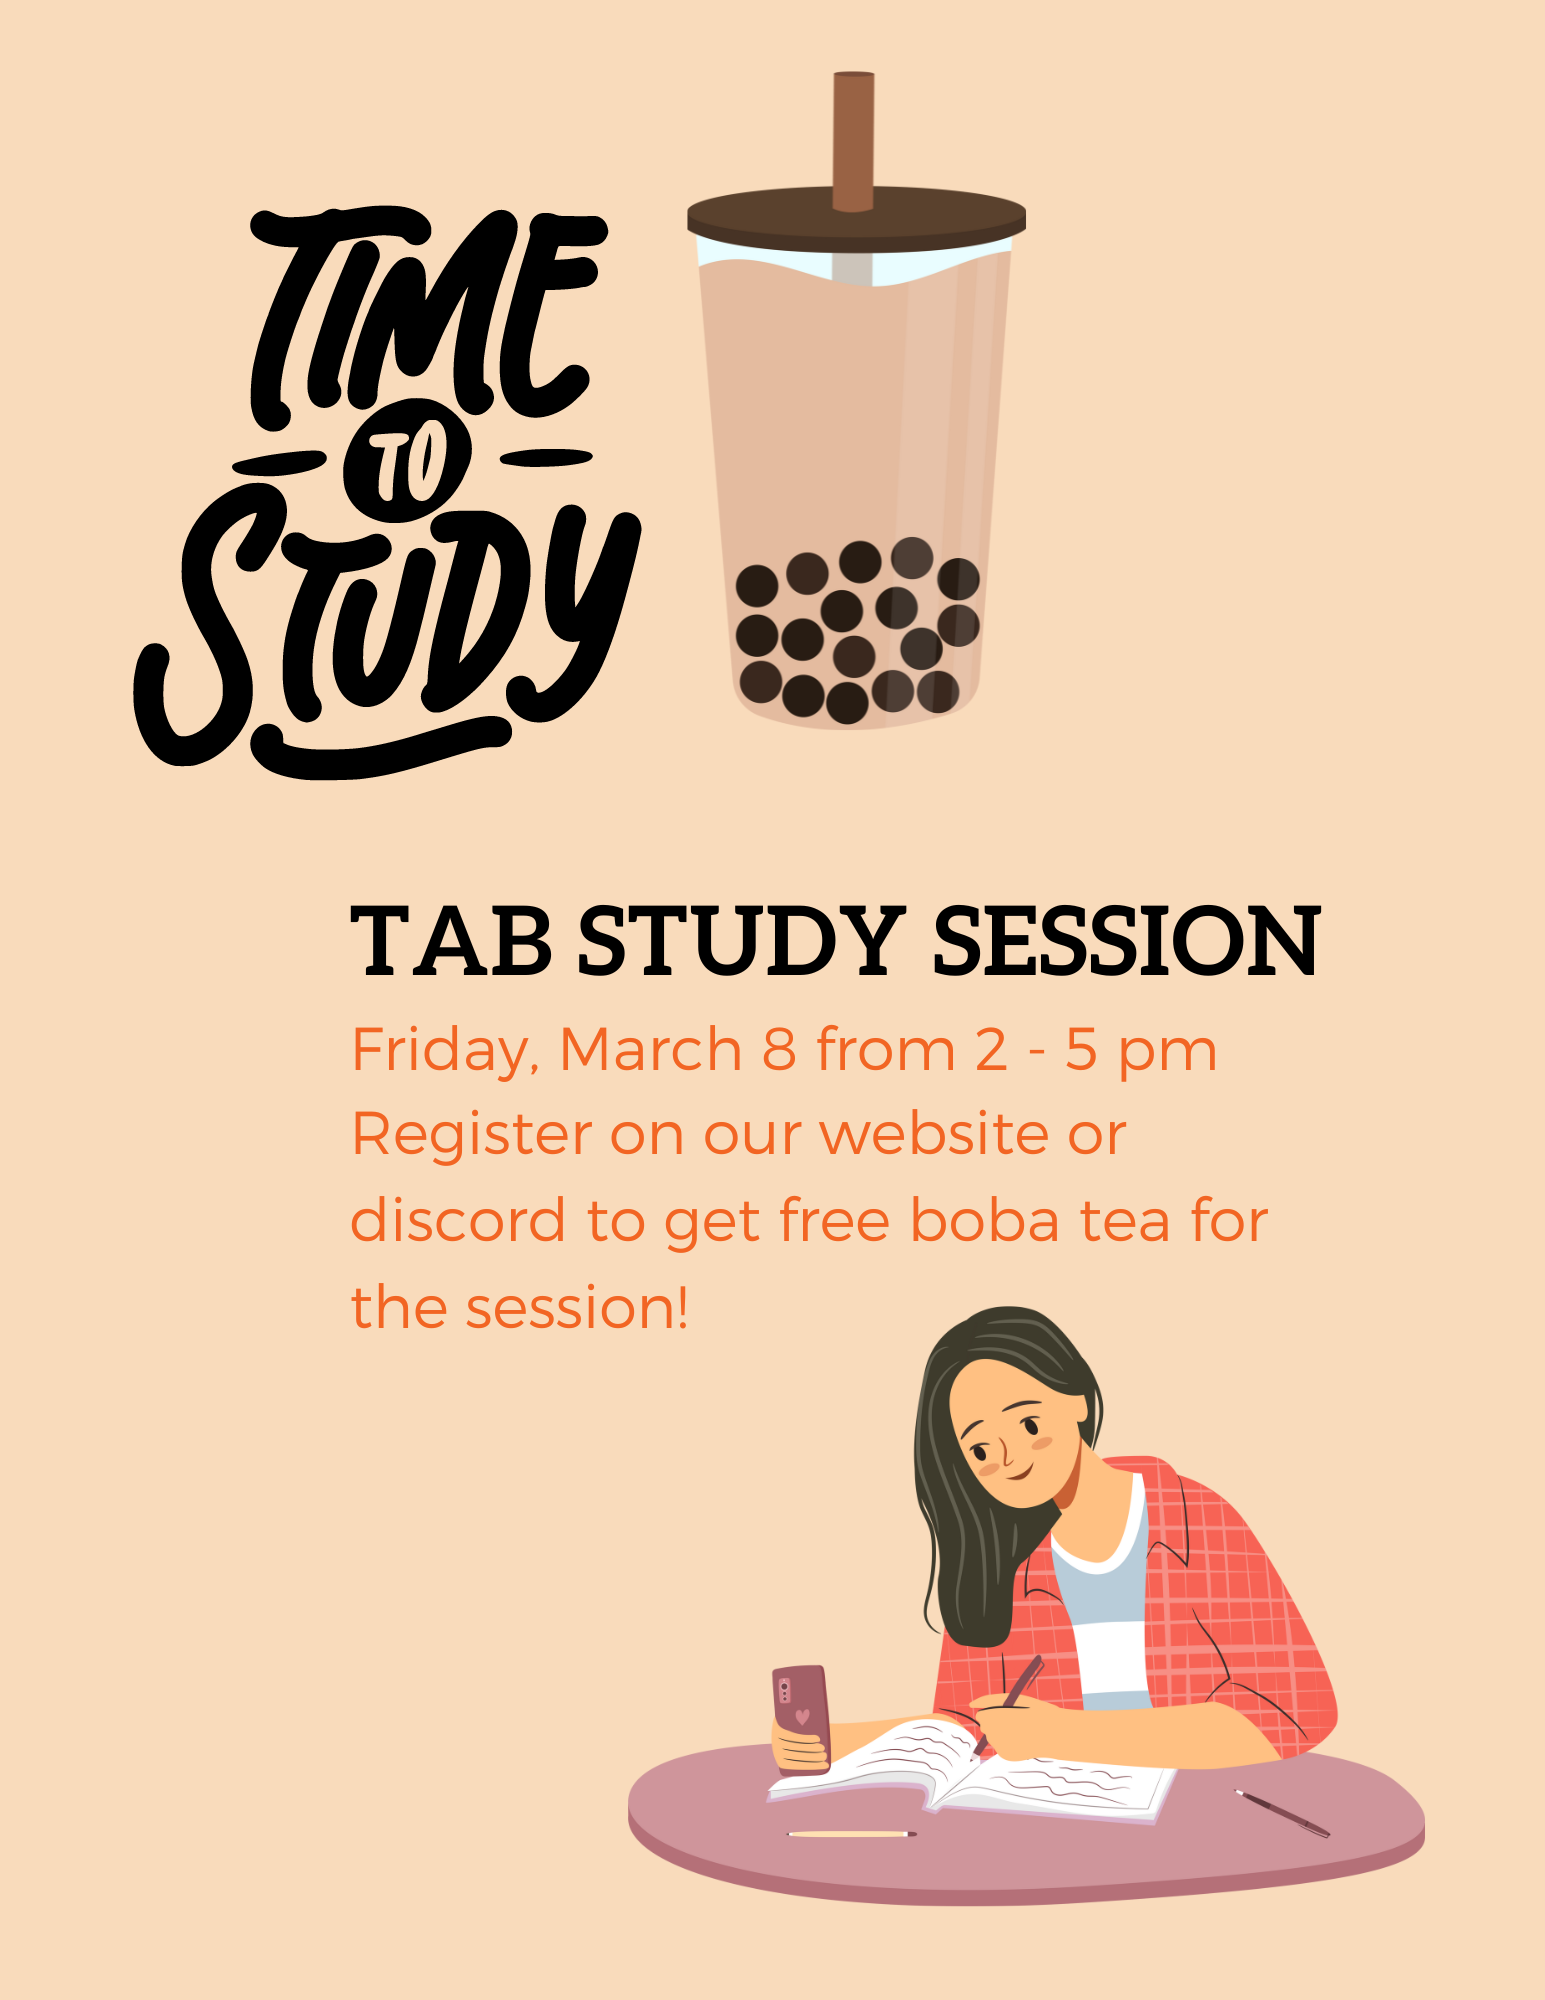 TAB study session -- register here to get free boba as youe study!